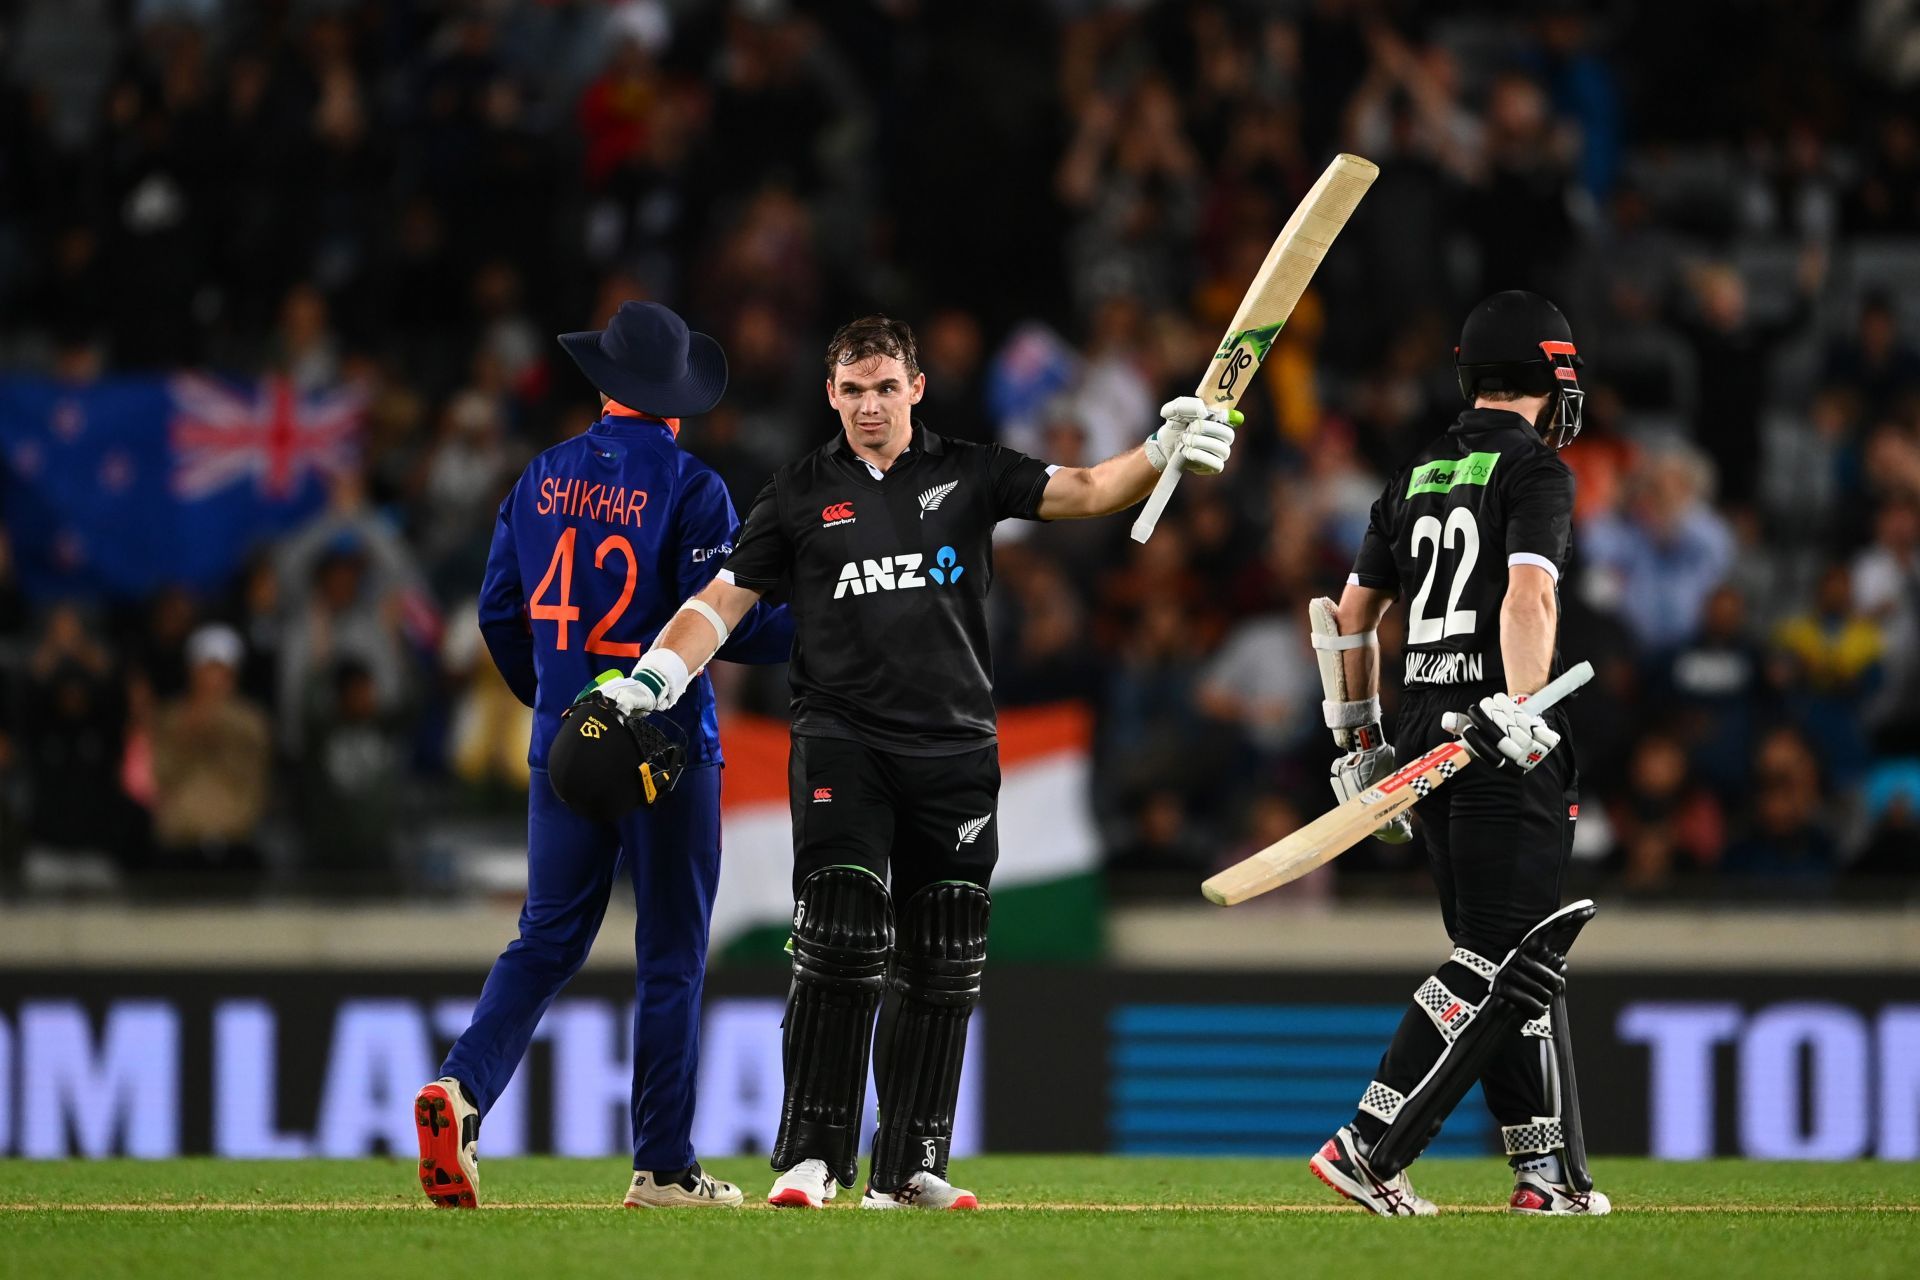 Tom Latham will captain New Zealand in the upcoming ODI series (Image: Getty)